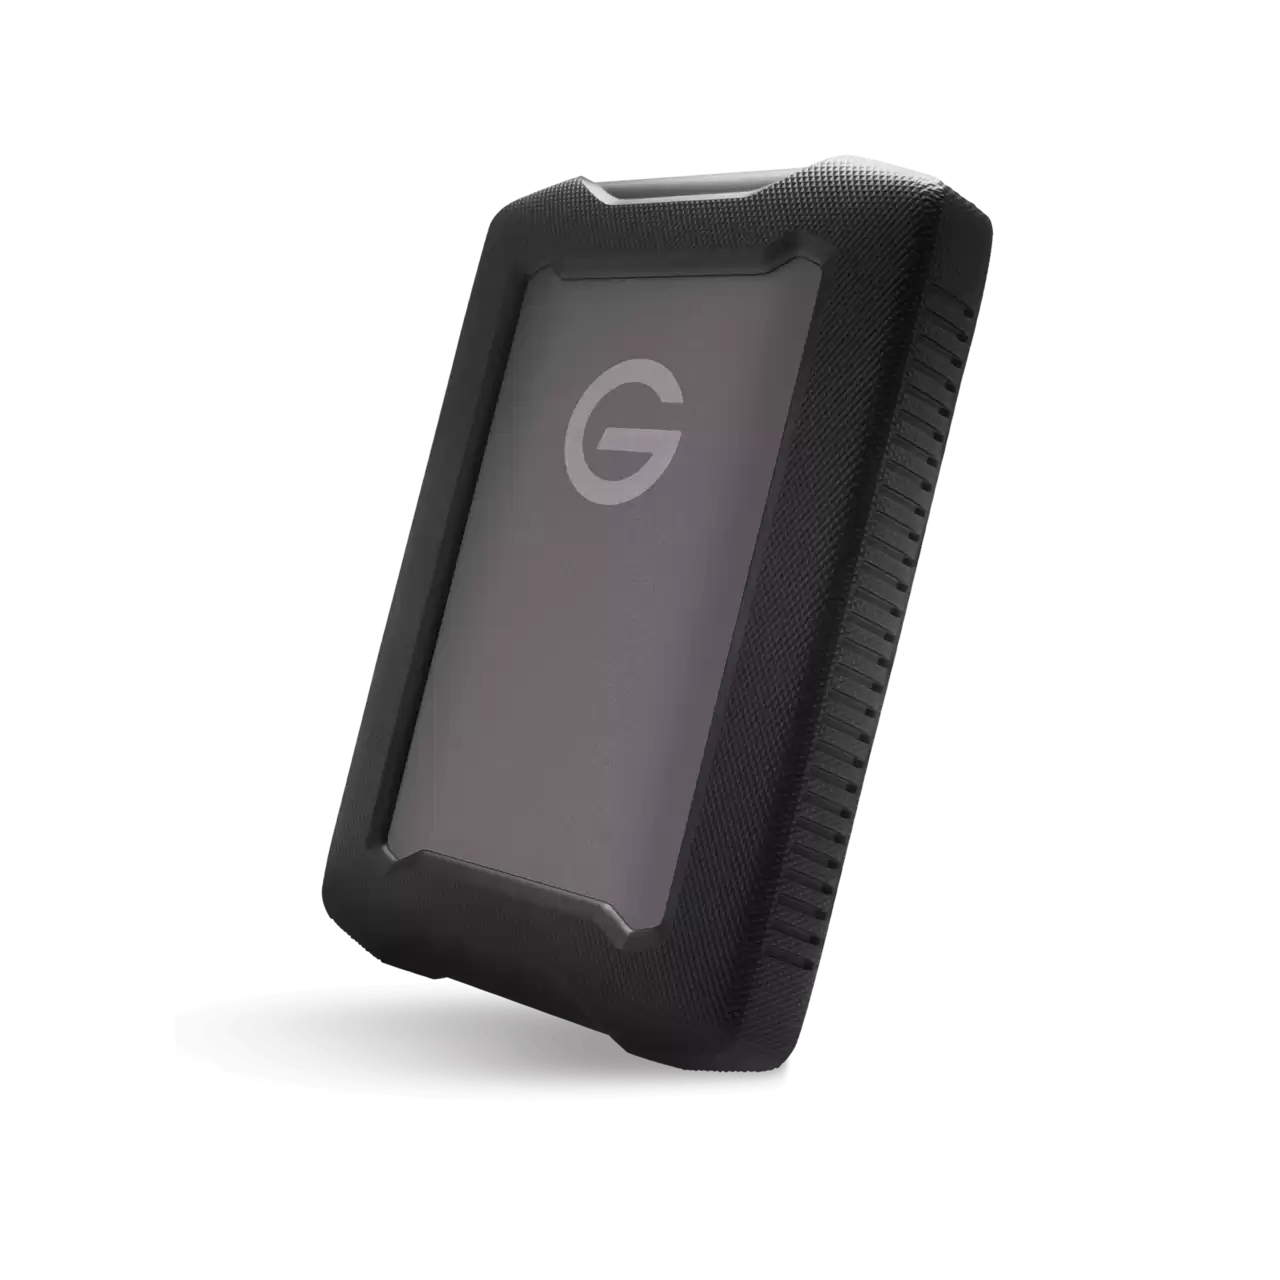  Professional G-DRIVE ArmorATD 2TB 2.5inch 140MB/s USB-C 5Gbps USB 3.2 Gen 1 Rugged portable external HDD - Space Grey